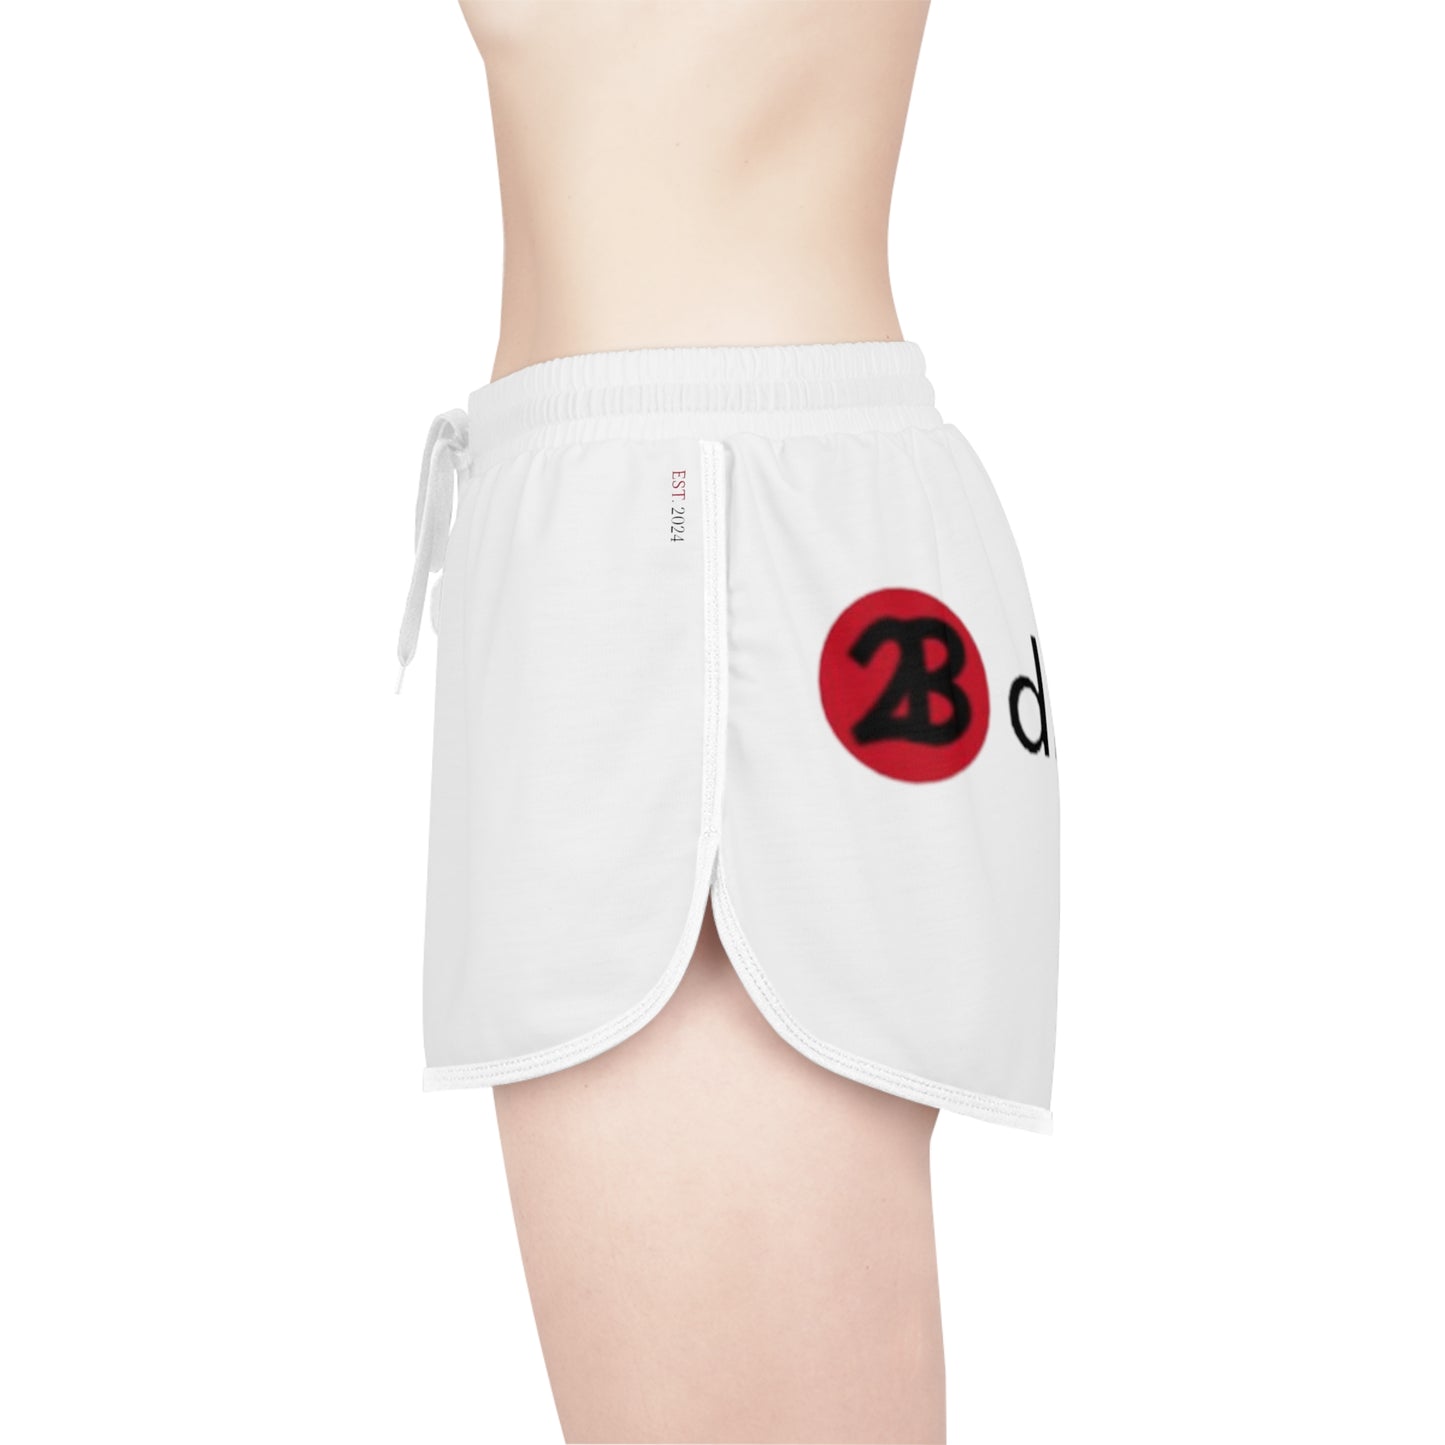 2Bdiscontinued. women's relaxed sports shorts whtdsc